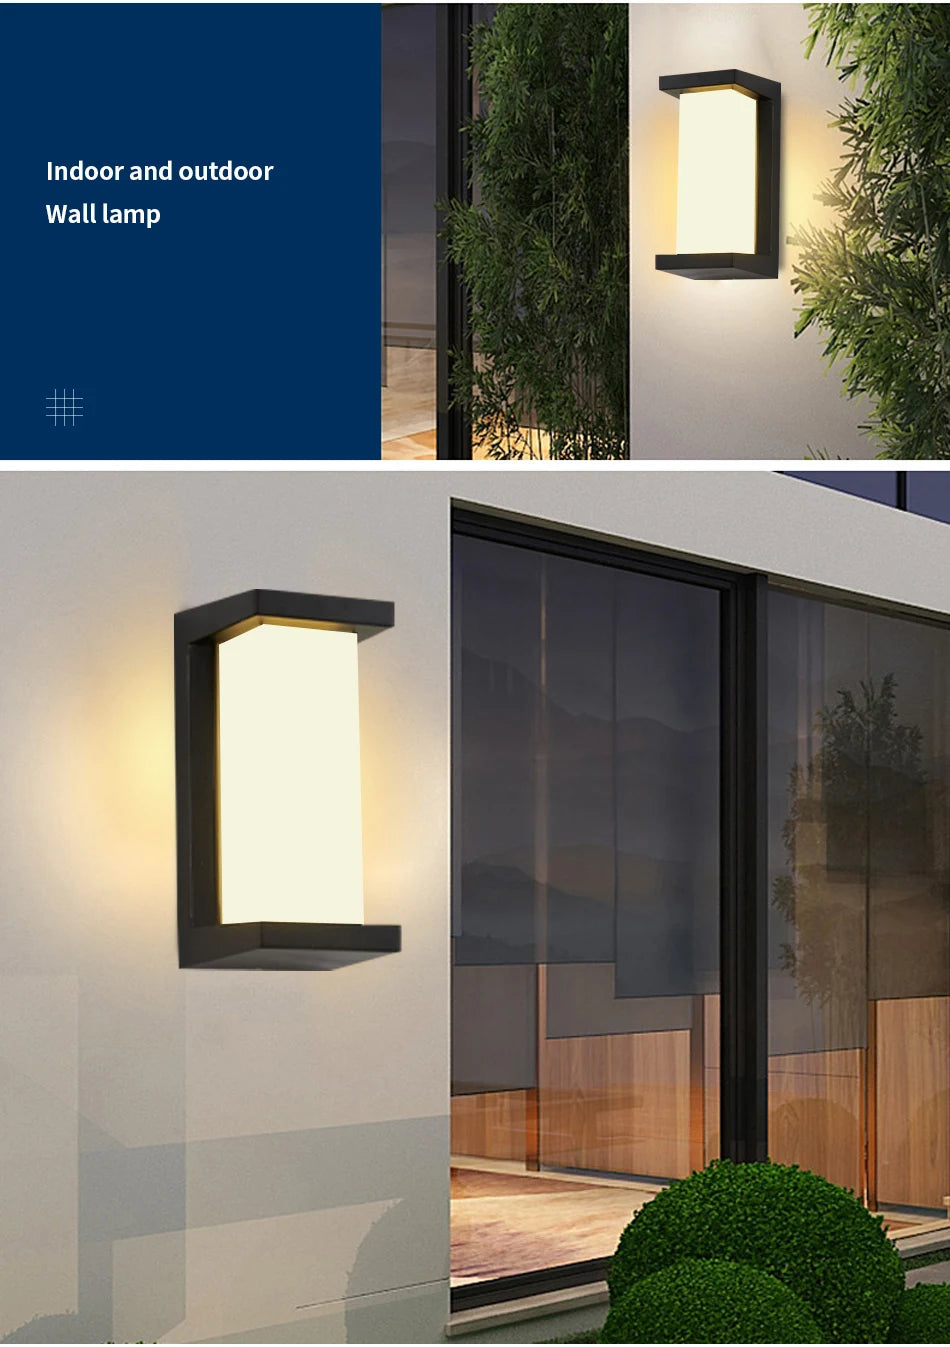 Led Wall Light, Auto-off feature turns off light when surrounding light is sufficient.